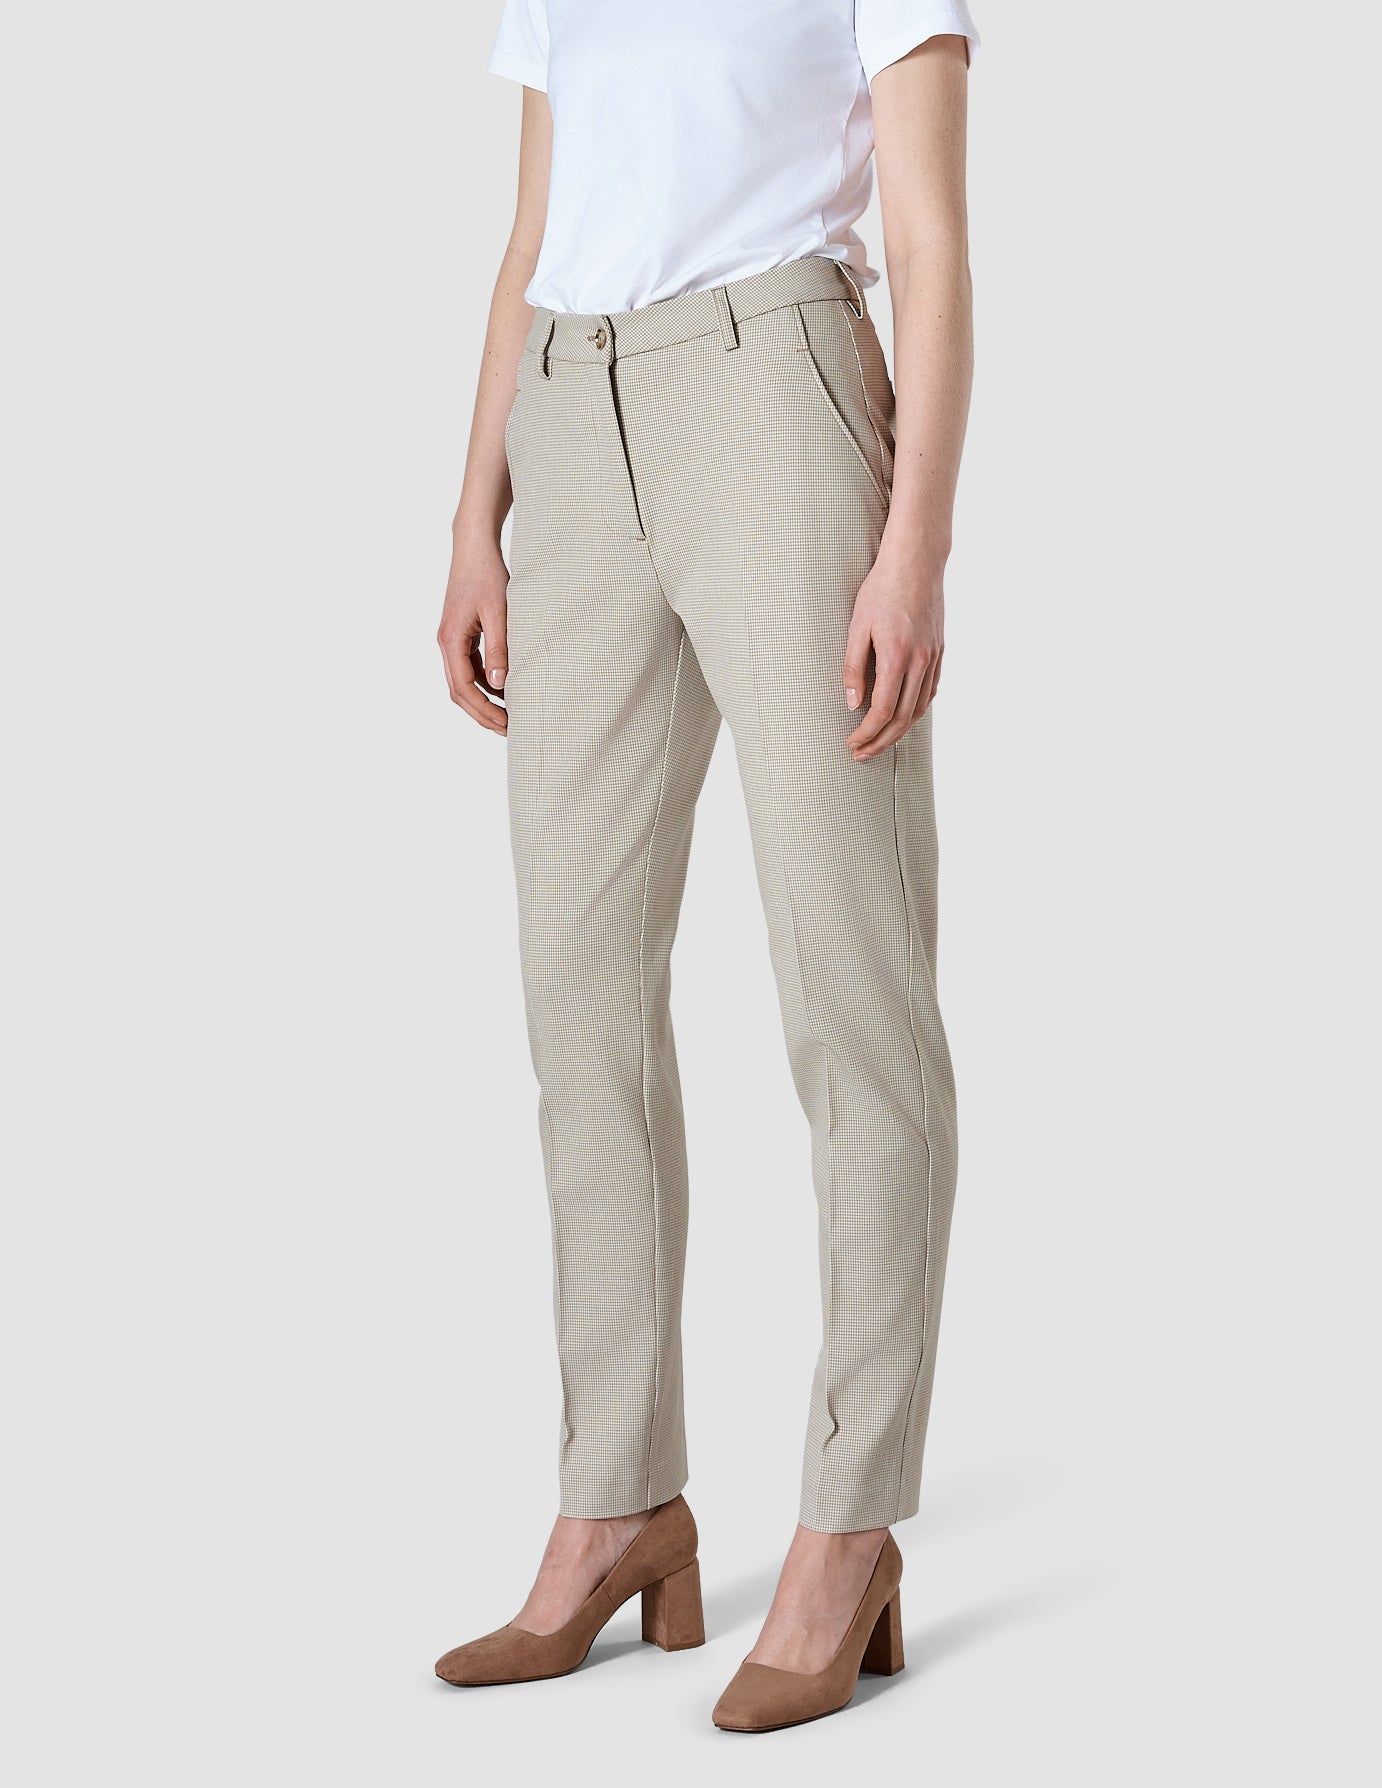 Women's High-Rise Slim Fit Bi-Stretch Ankle Pants - A New Day™ Cream 16